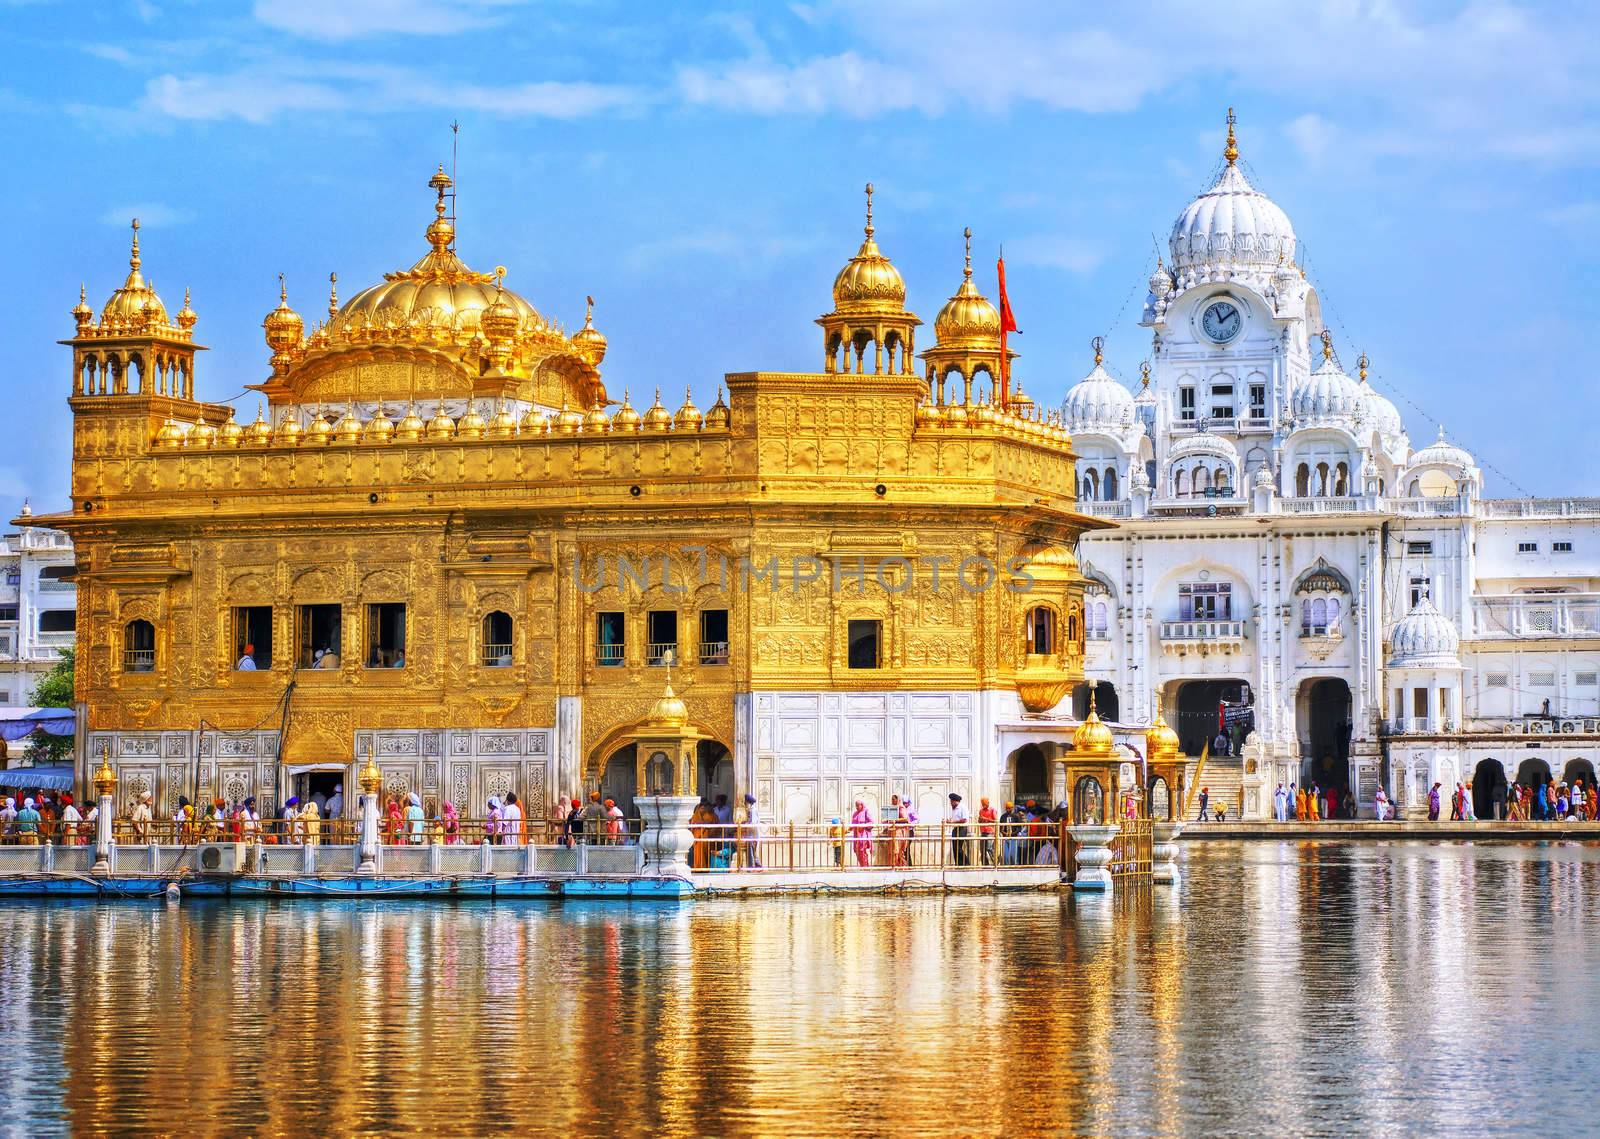 Golden Temple, the main sanctuary of Sikhs, Amritsar, India by GlobePhotos